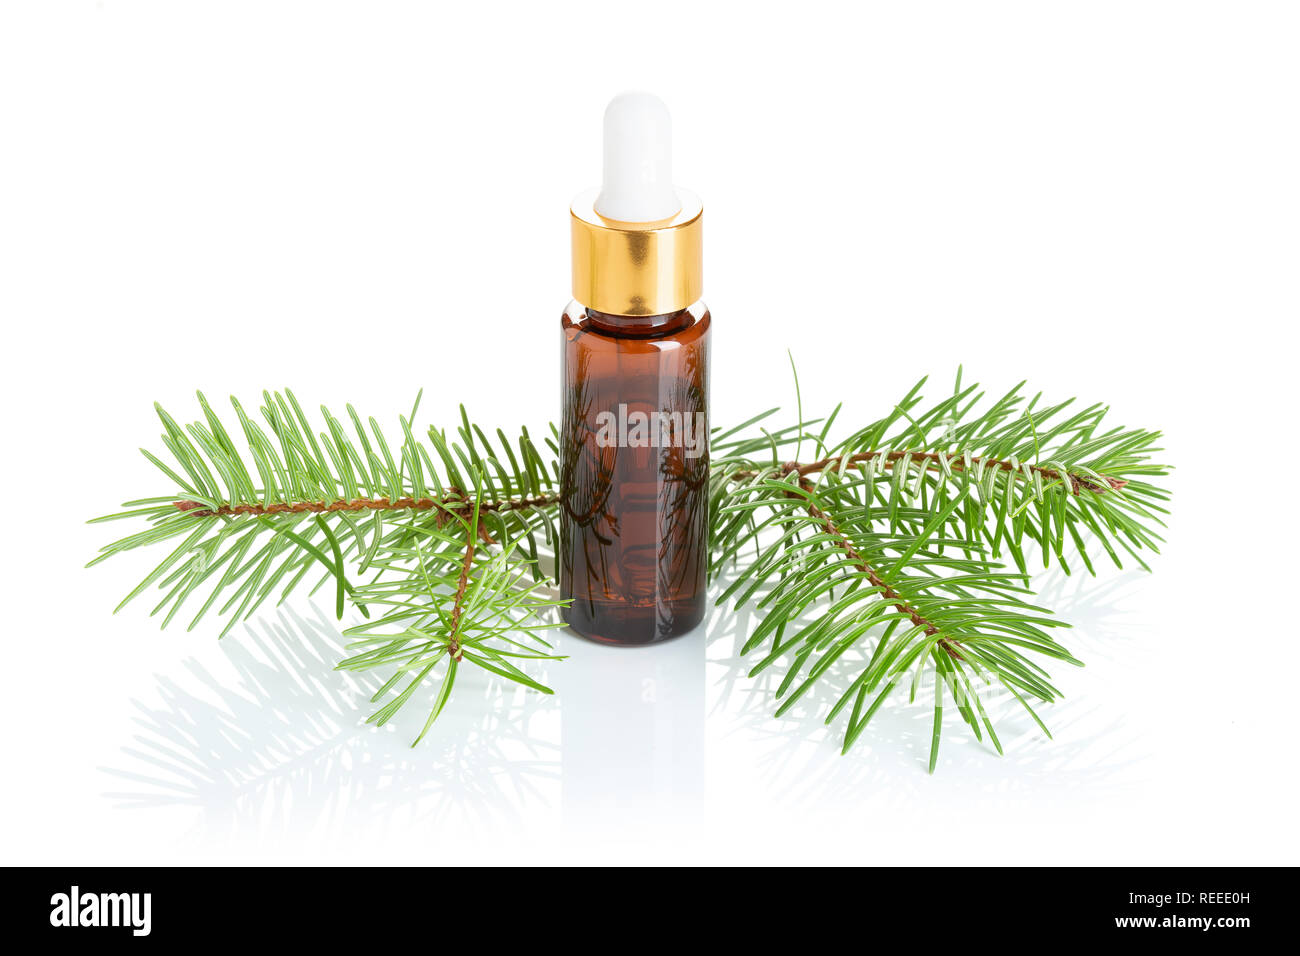 Pine essential oil isolated on white background. Pine oil bottle with dropper for beauty, skin care, wellness. Natural remedies Stock Photo